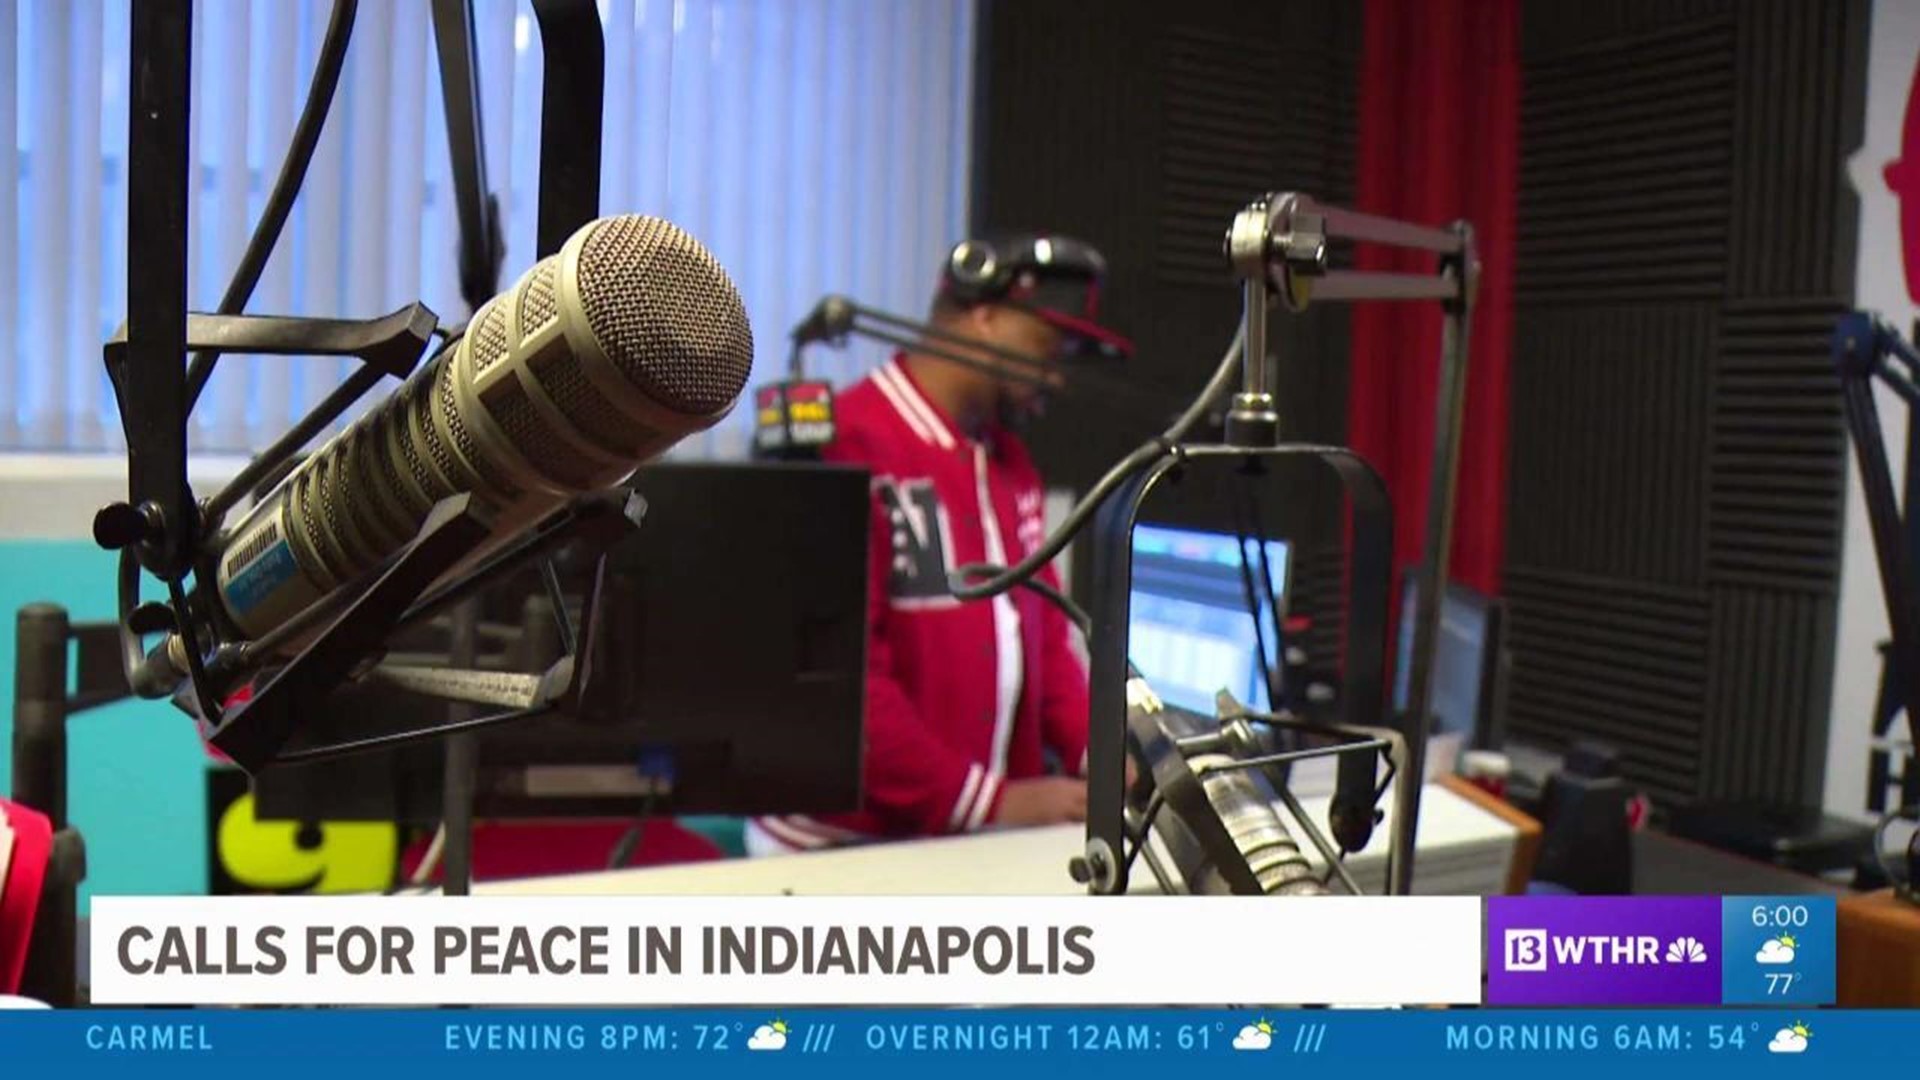 Calls for peace in Indy